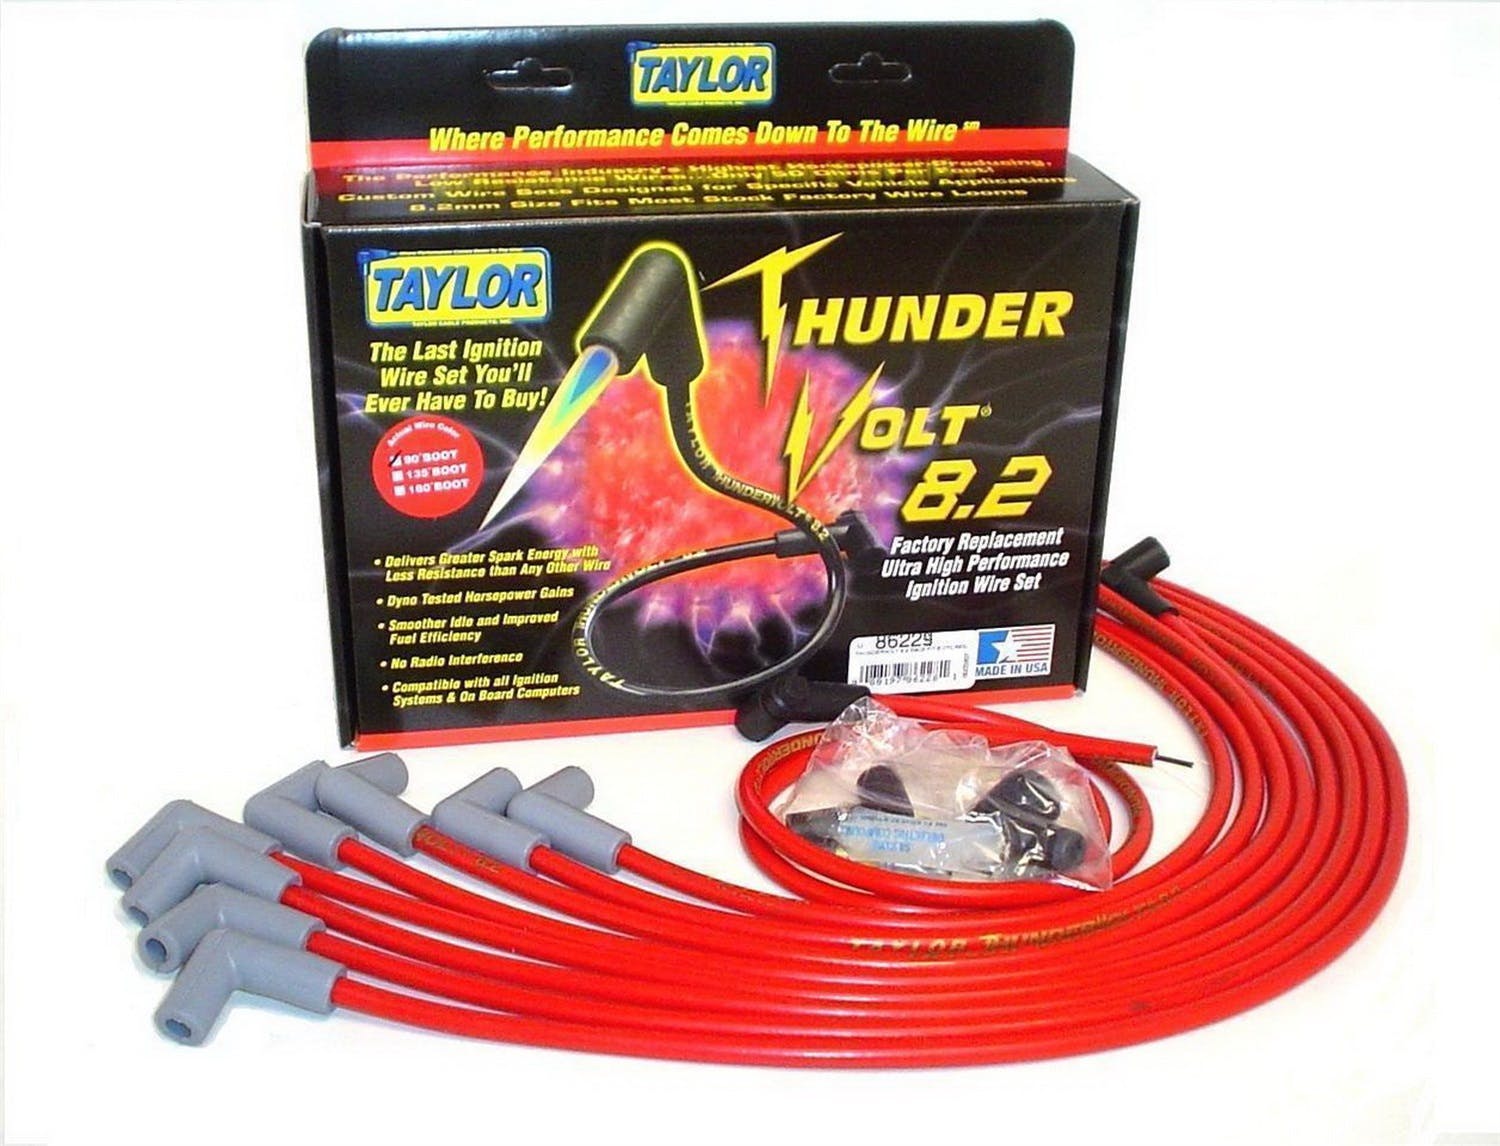 Taylor Cable Products 86229 Thundervolt 8.2 race fit 8 cyl red